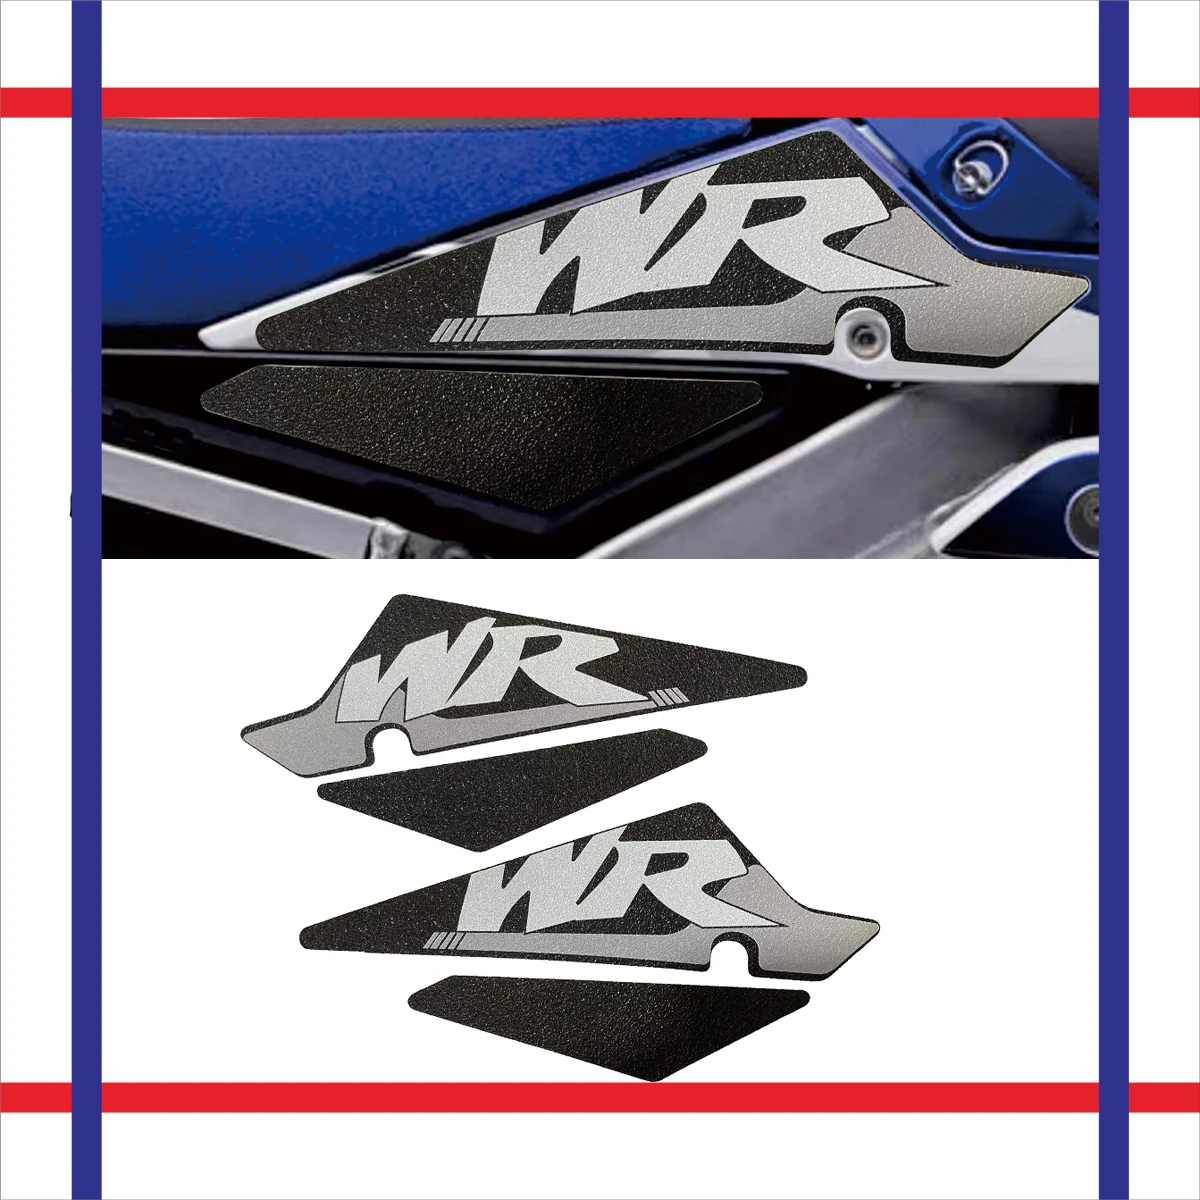 For YAMAHA WR 250F 2015-2019 WR 450F 2016-18 Motorcycle Anti slip Tank Pad 3M Side Gas Knee Grip Traction Pads Protector Sticker